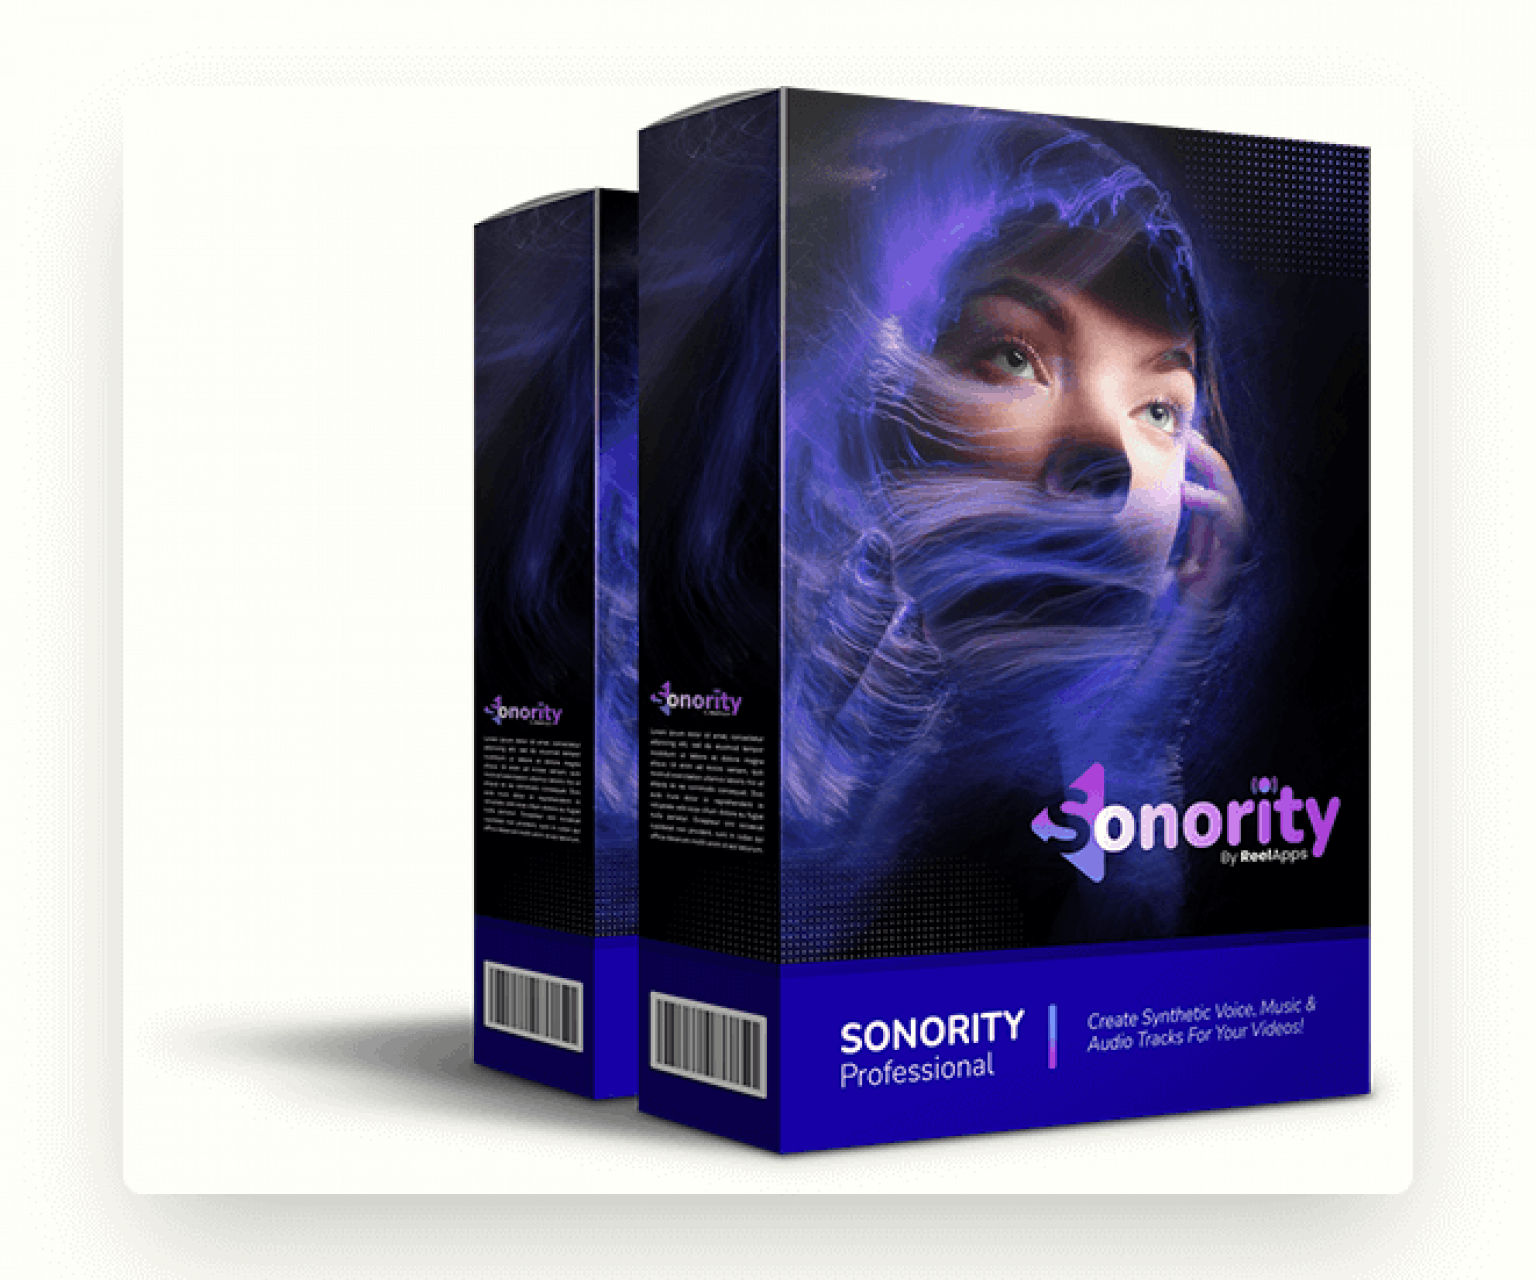 Sonority download the new for android